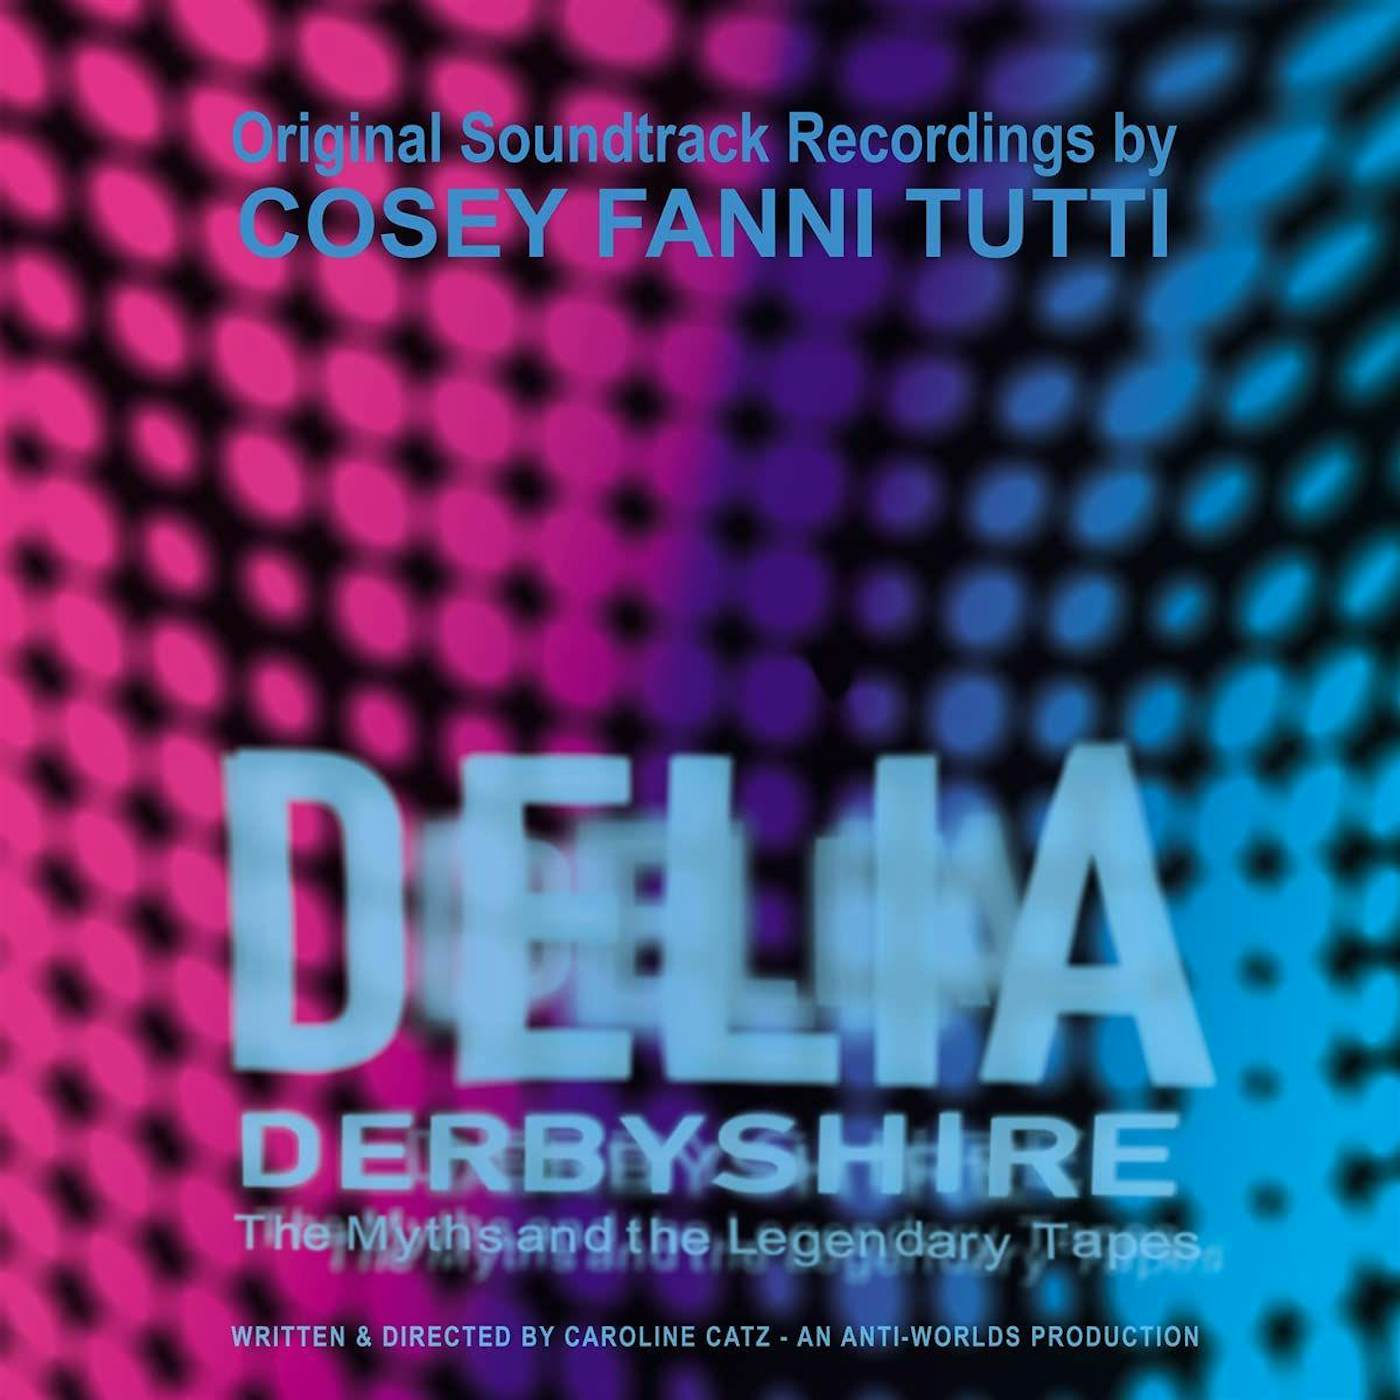 Cosey Fanni Tutti Delia Derbyshire: The Myths And The Legendary Tapes Vinyl Record